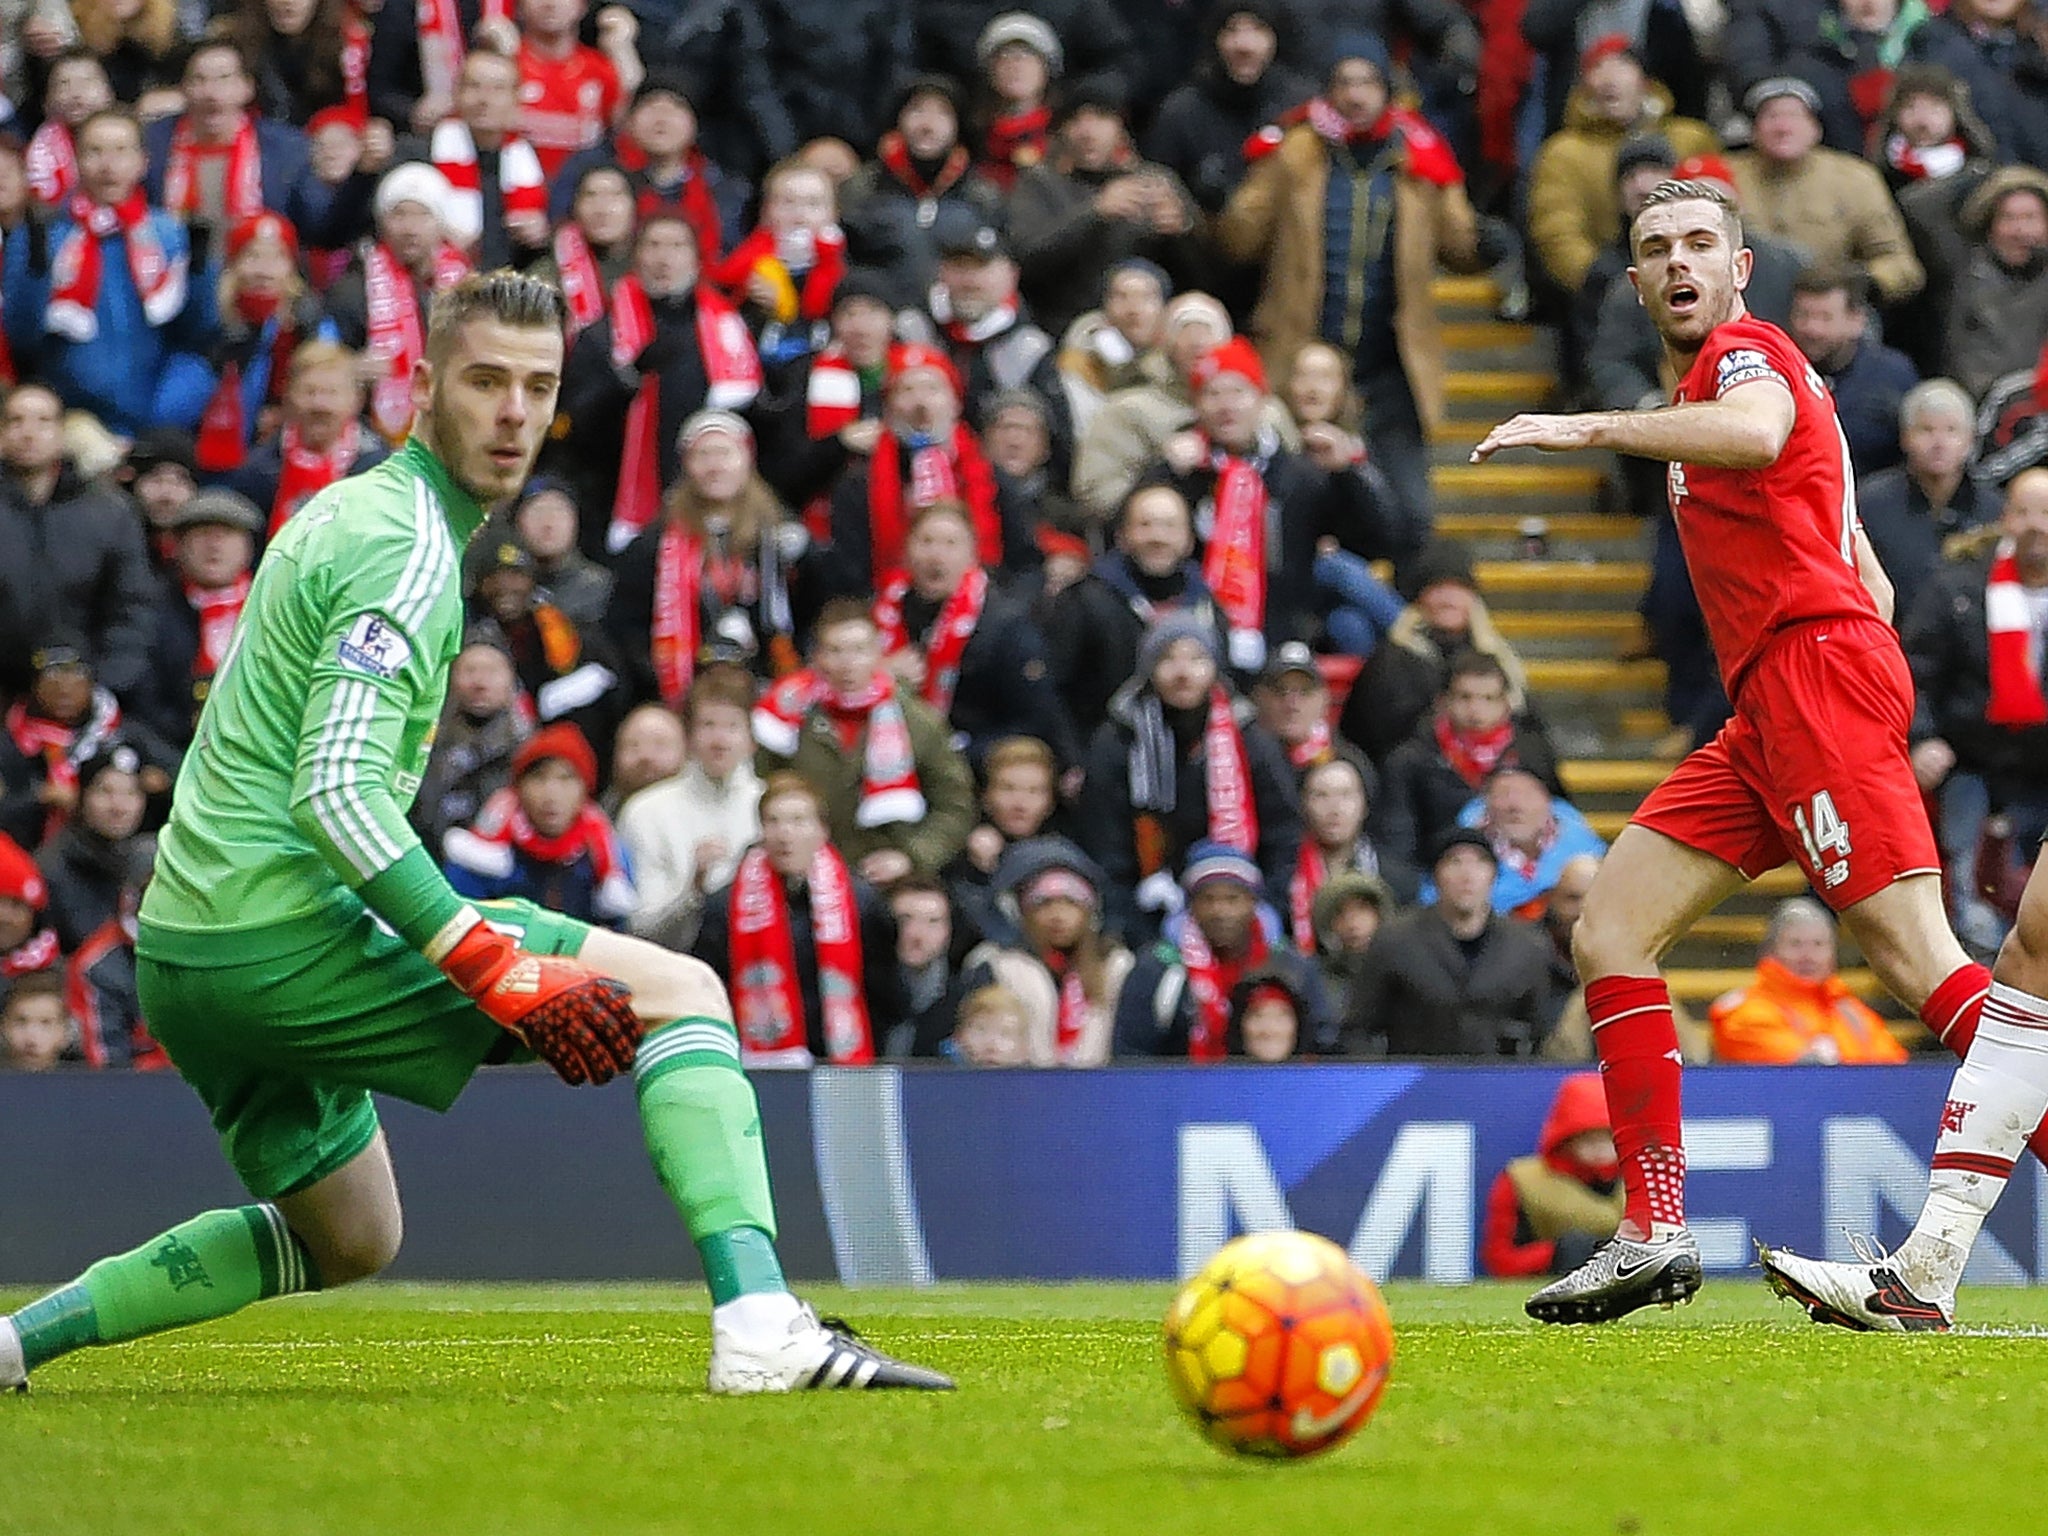 Jordan Henderson, the Liverpool captain, fires wide at Anfield when he should have done better